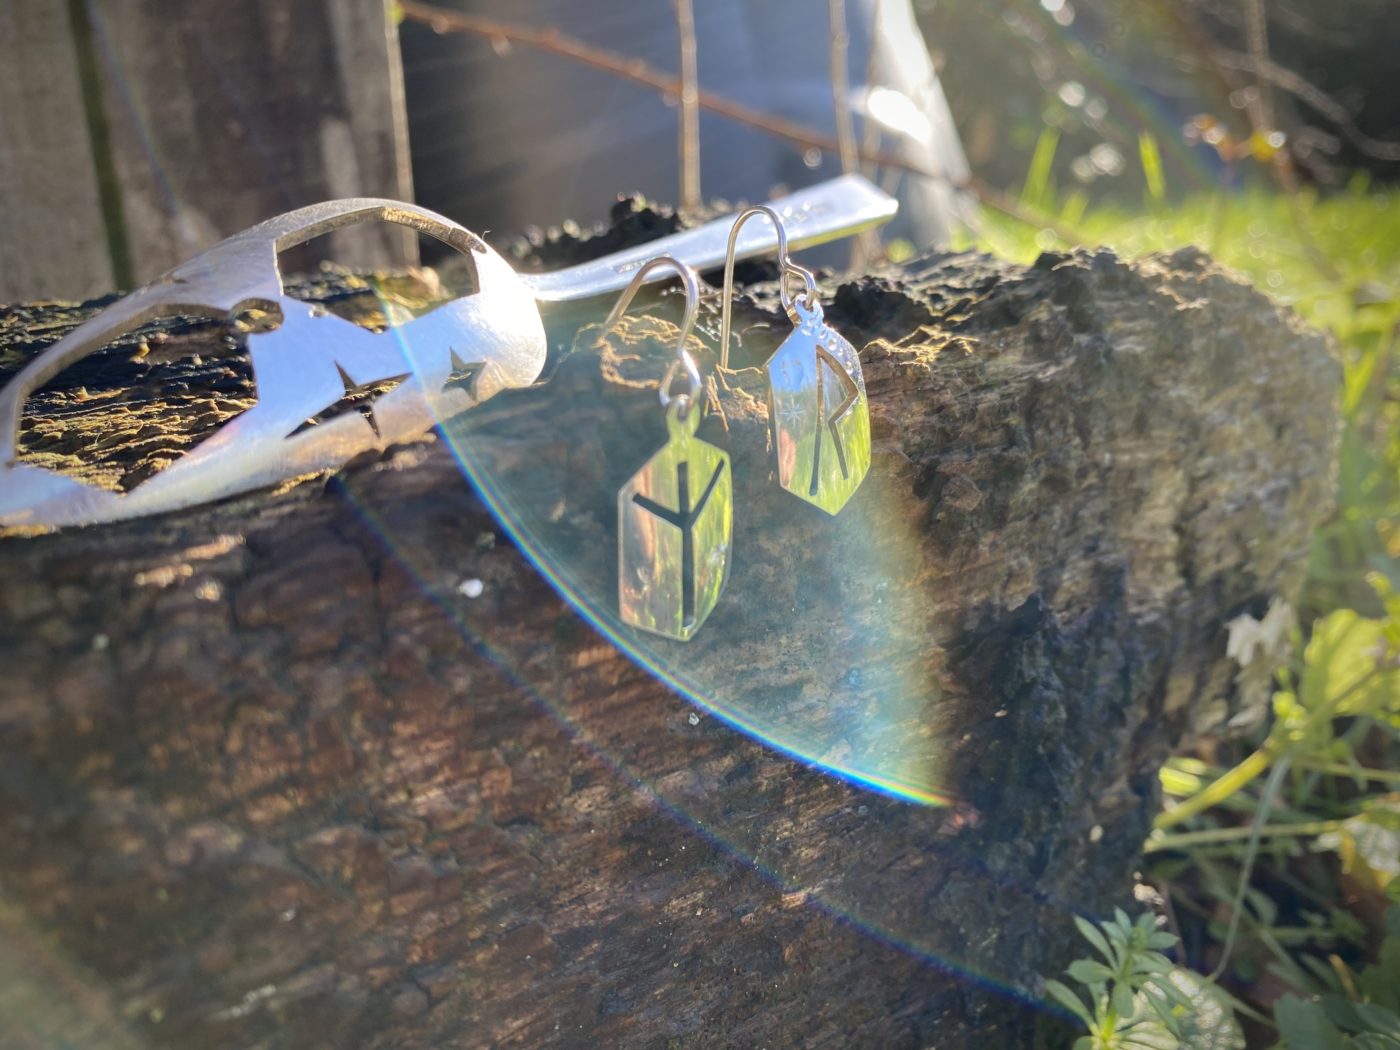 rune jewellery earrings made from recycled raw materials. Handmade ethical rune earrings